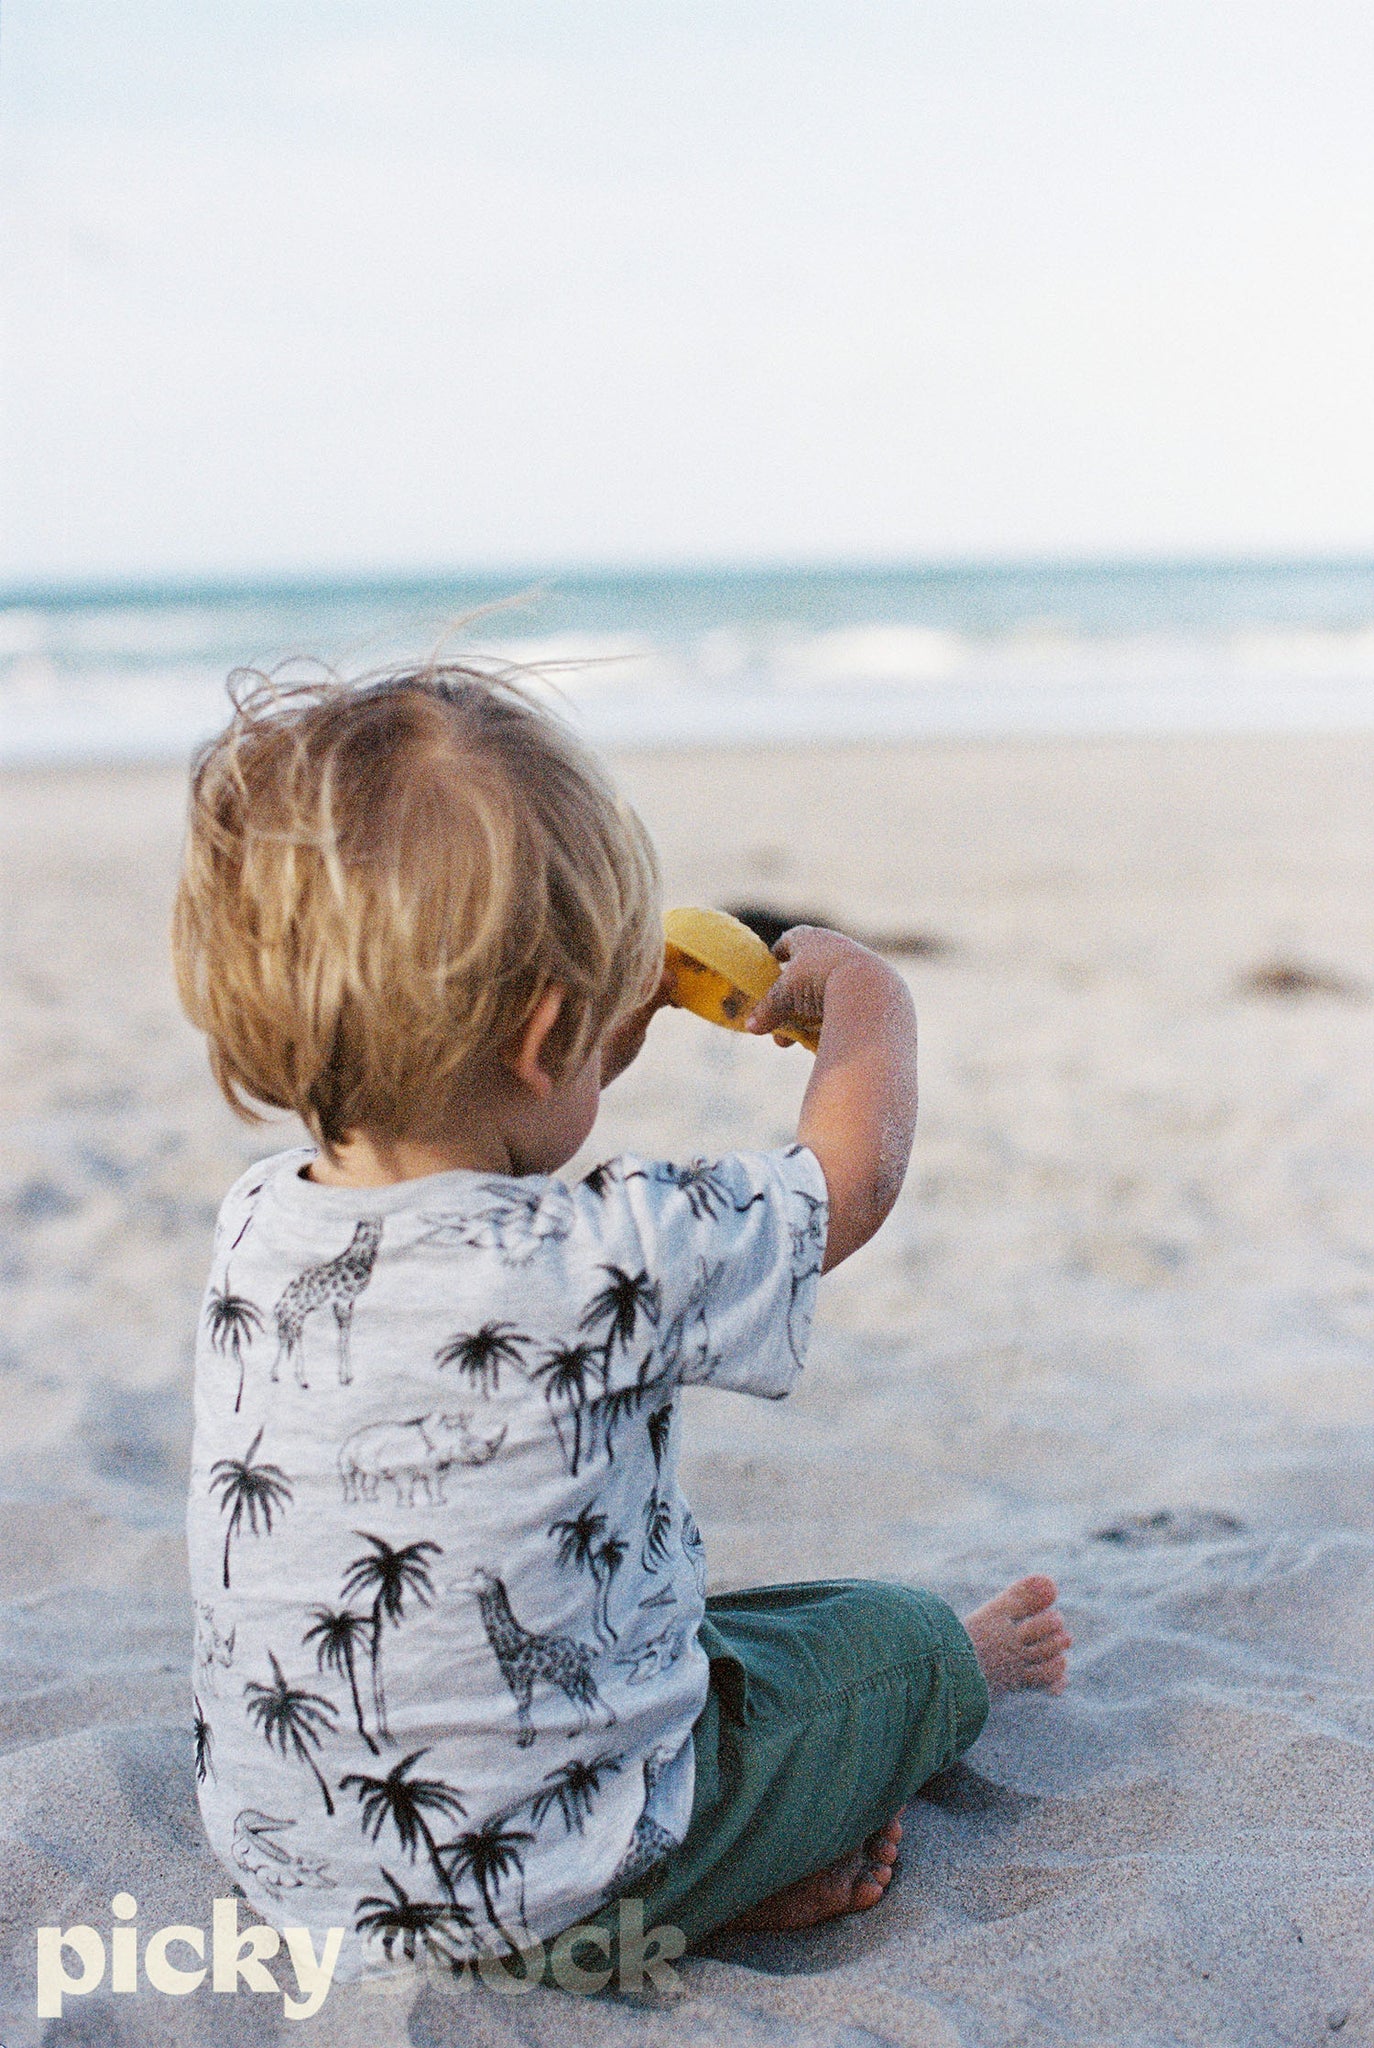 Young boy sitting on golden sand, holding a yellow spade. Wearing green shorts, with a grey top with a print of palm tree and giraffe. Ocean in background. 